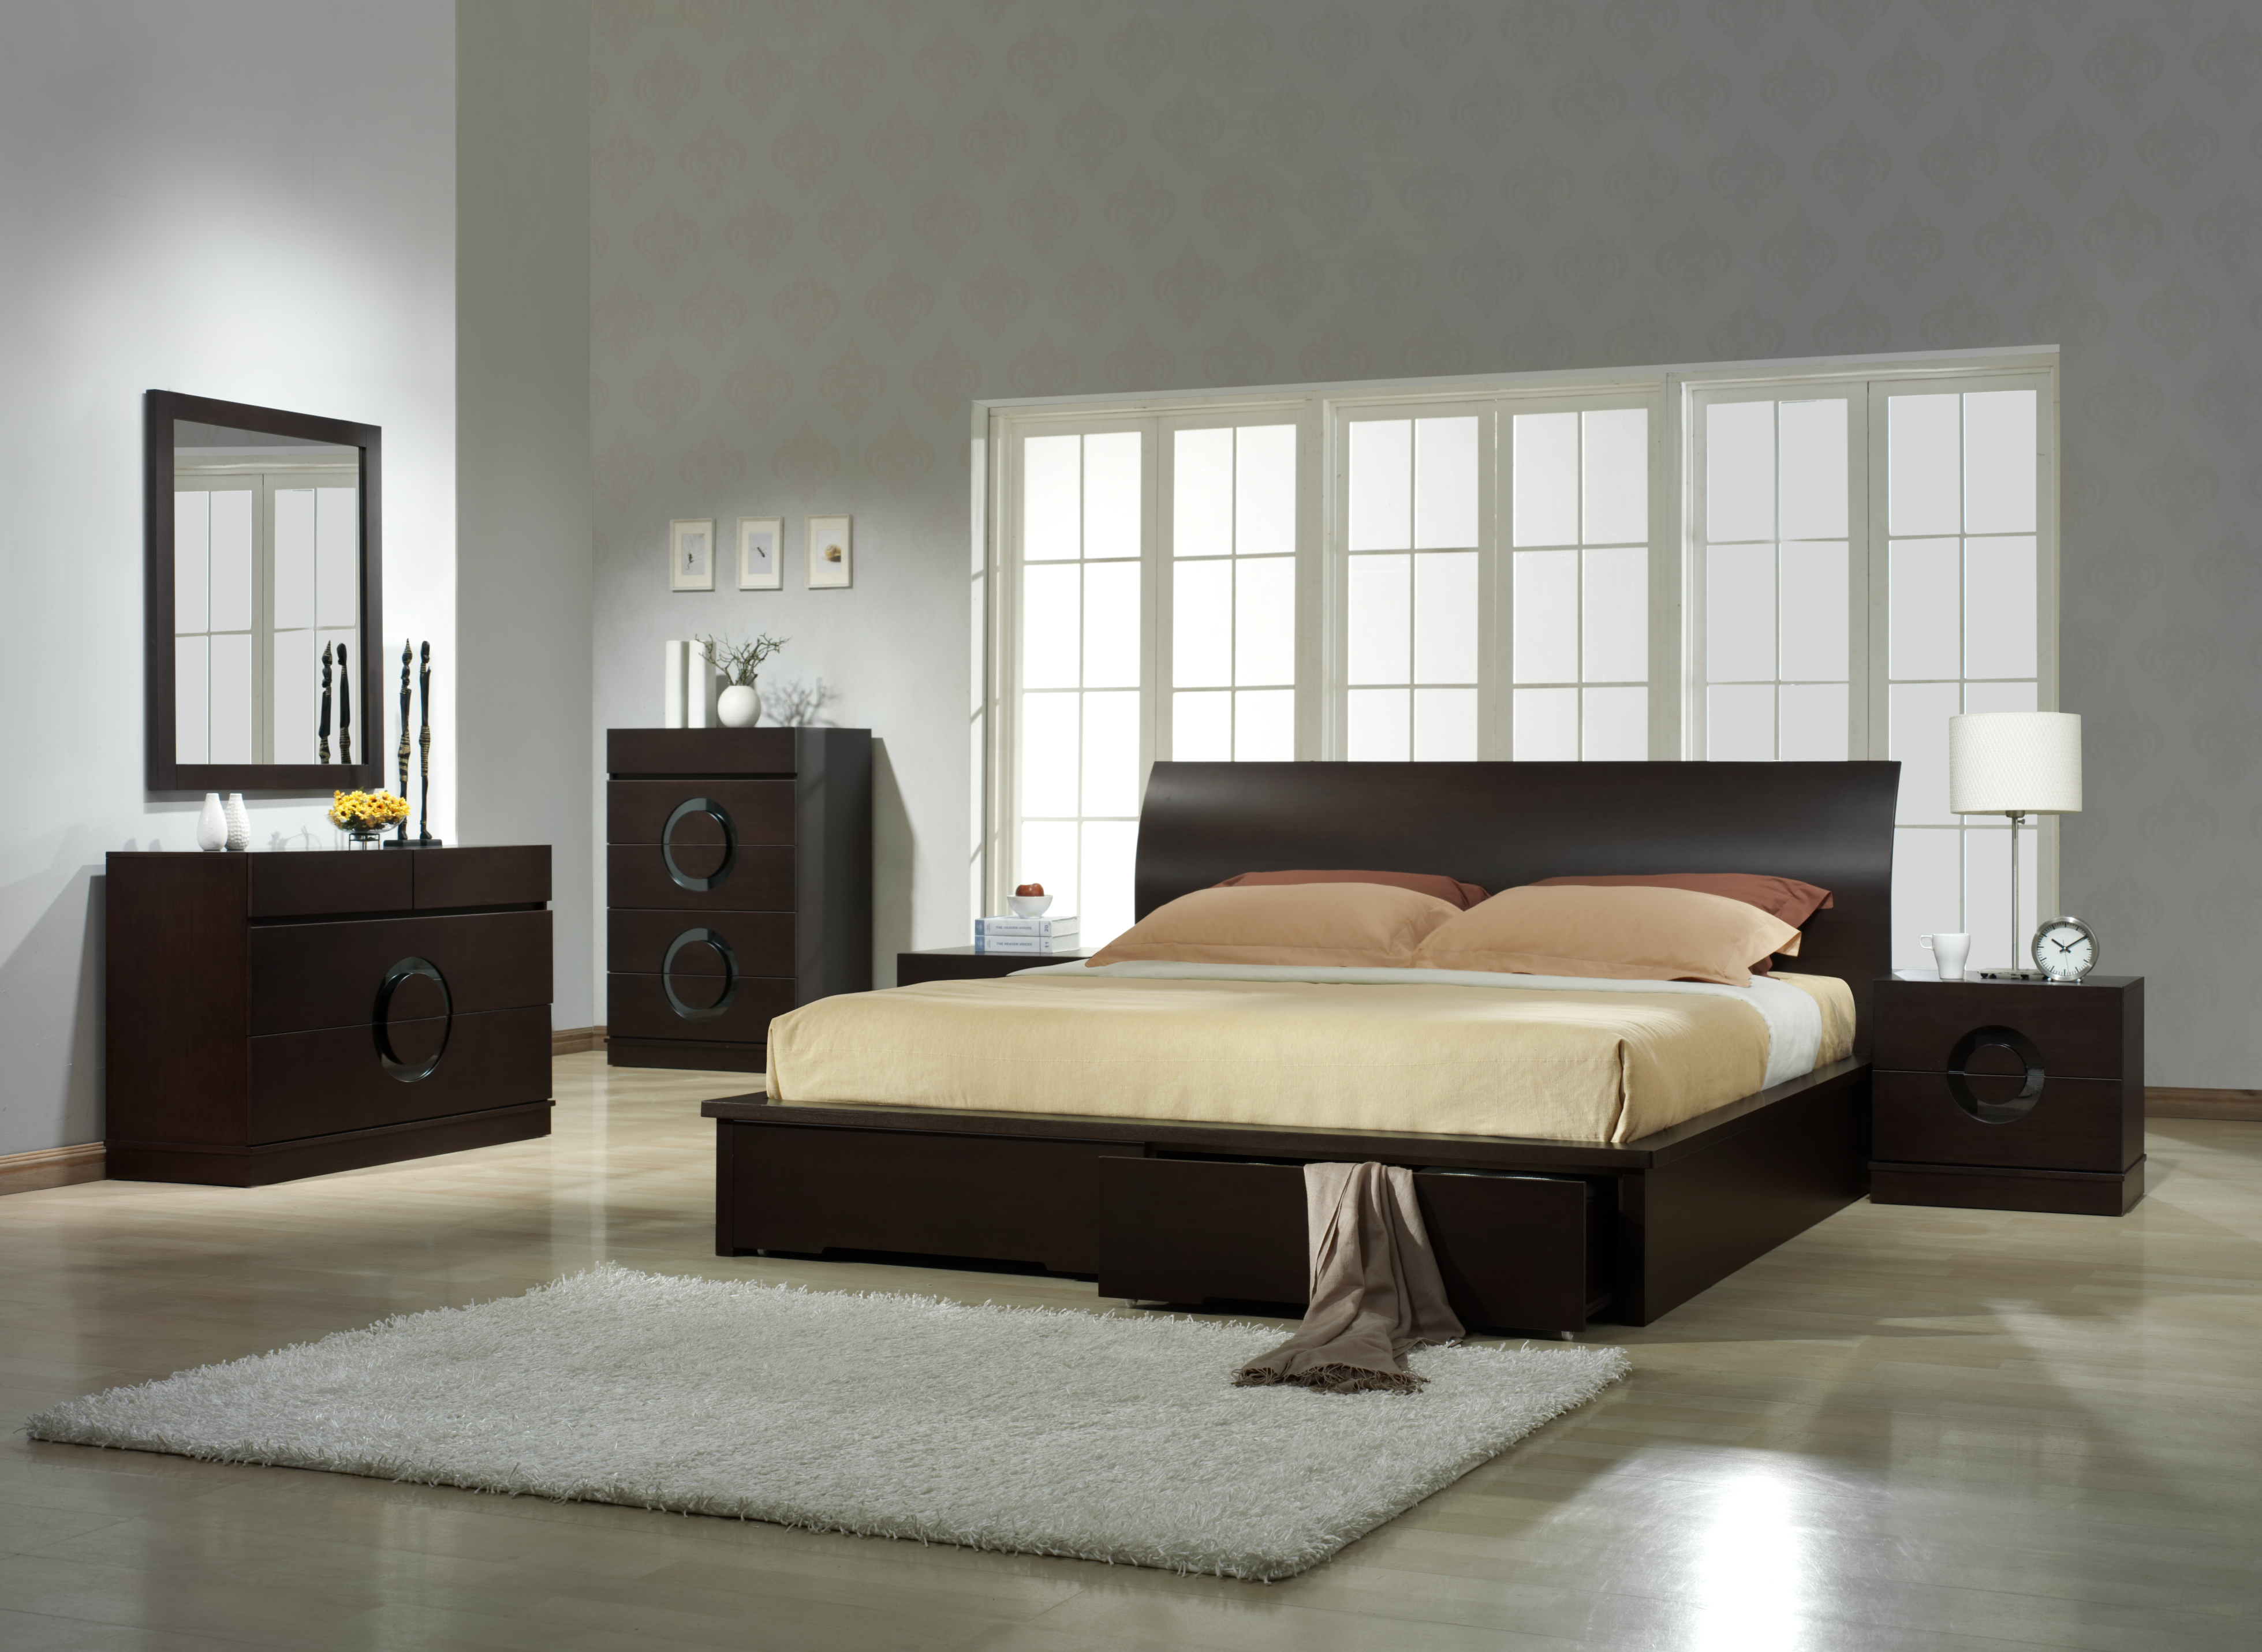 silver wood bedroom sets photo - 3